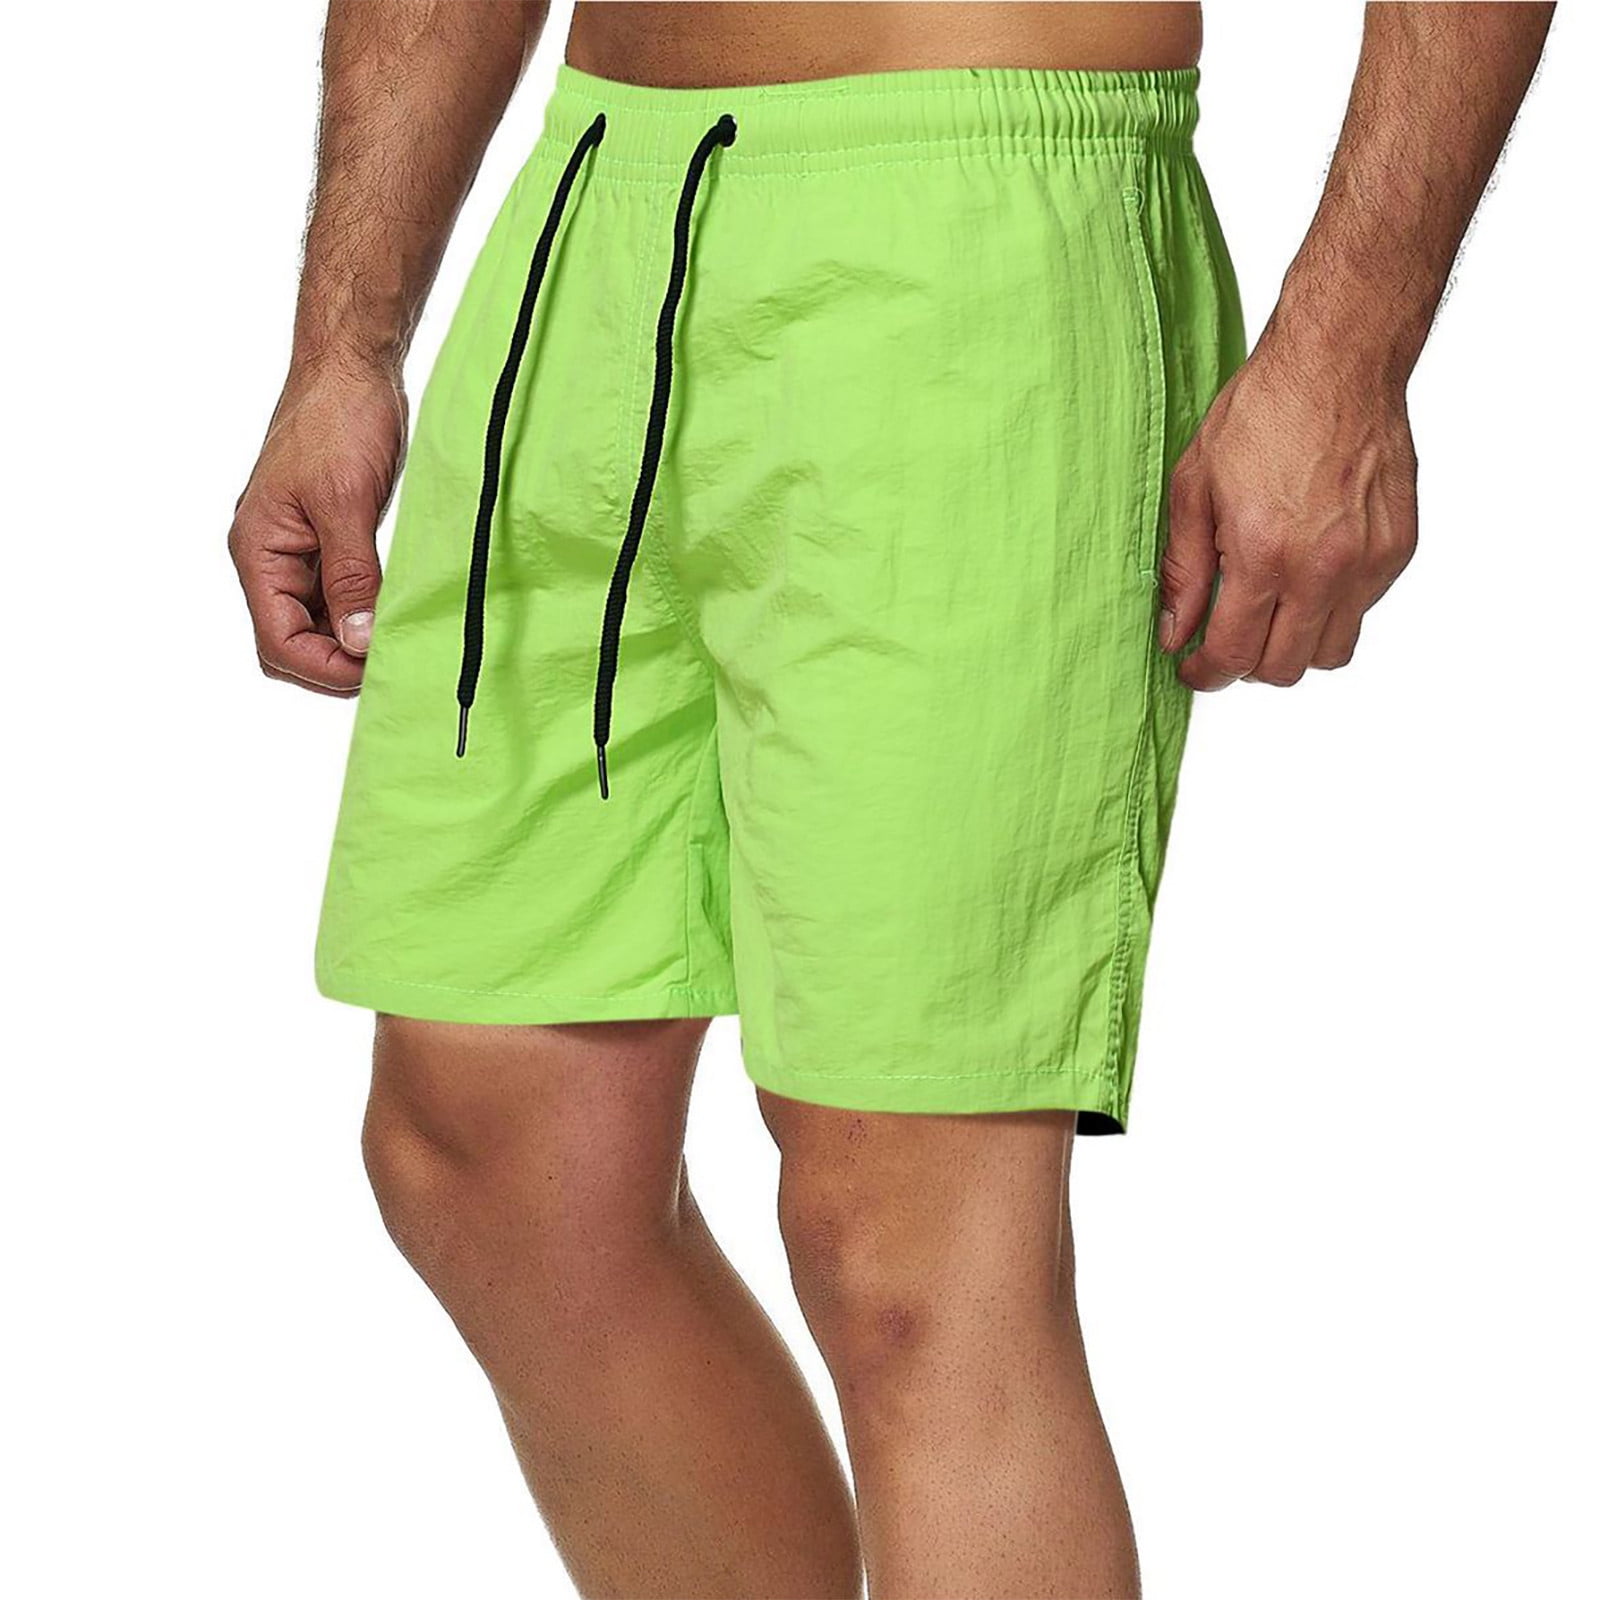 Men's Shorts Casual Classic Fit Drawstring Summer Beach Shorts with Elastic  Waist and Pockets